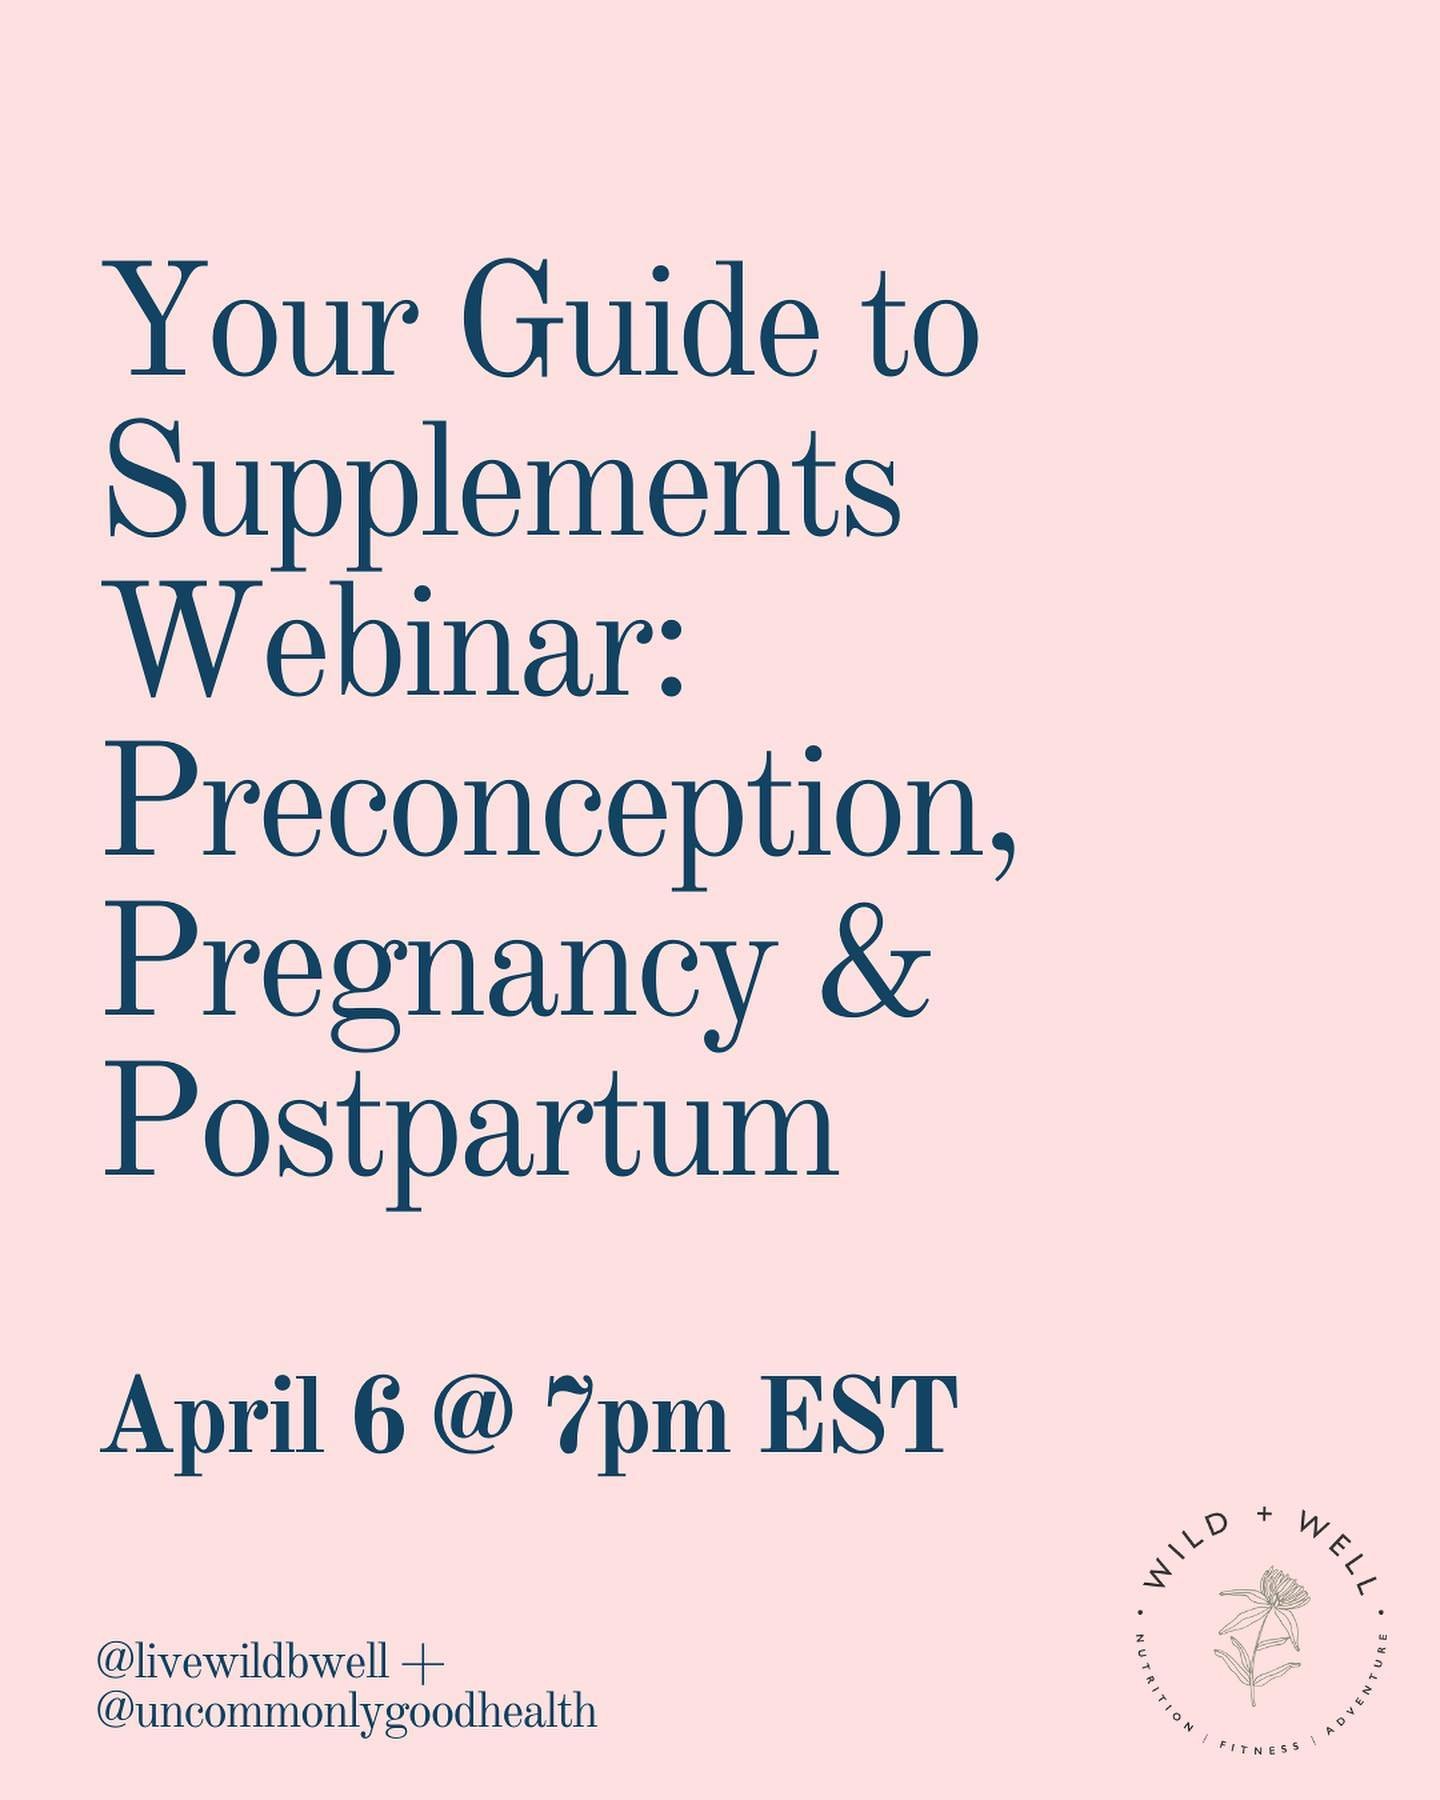 🚨new live webinar offering🚨

@livewildbewell and I have been dreaming up ways to offer more resources to our followers and our community! After our last webinar on optimizing children&rsquo;s health, we got a lot of requests for a webinar on supple